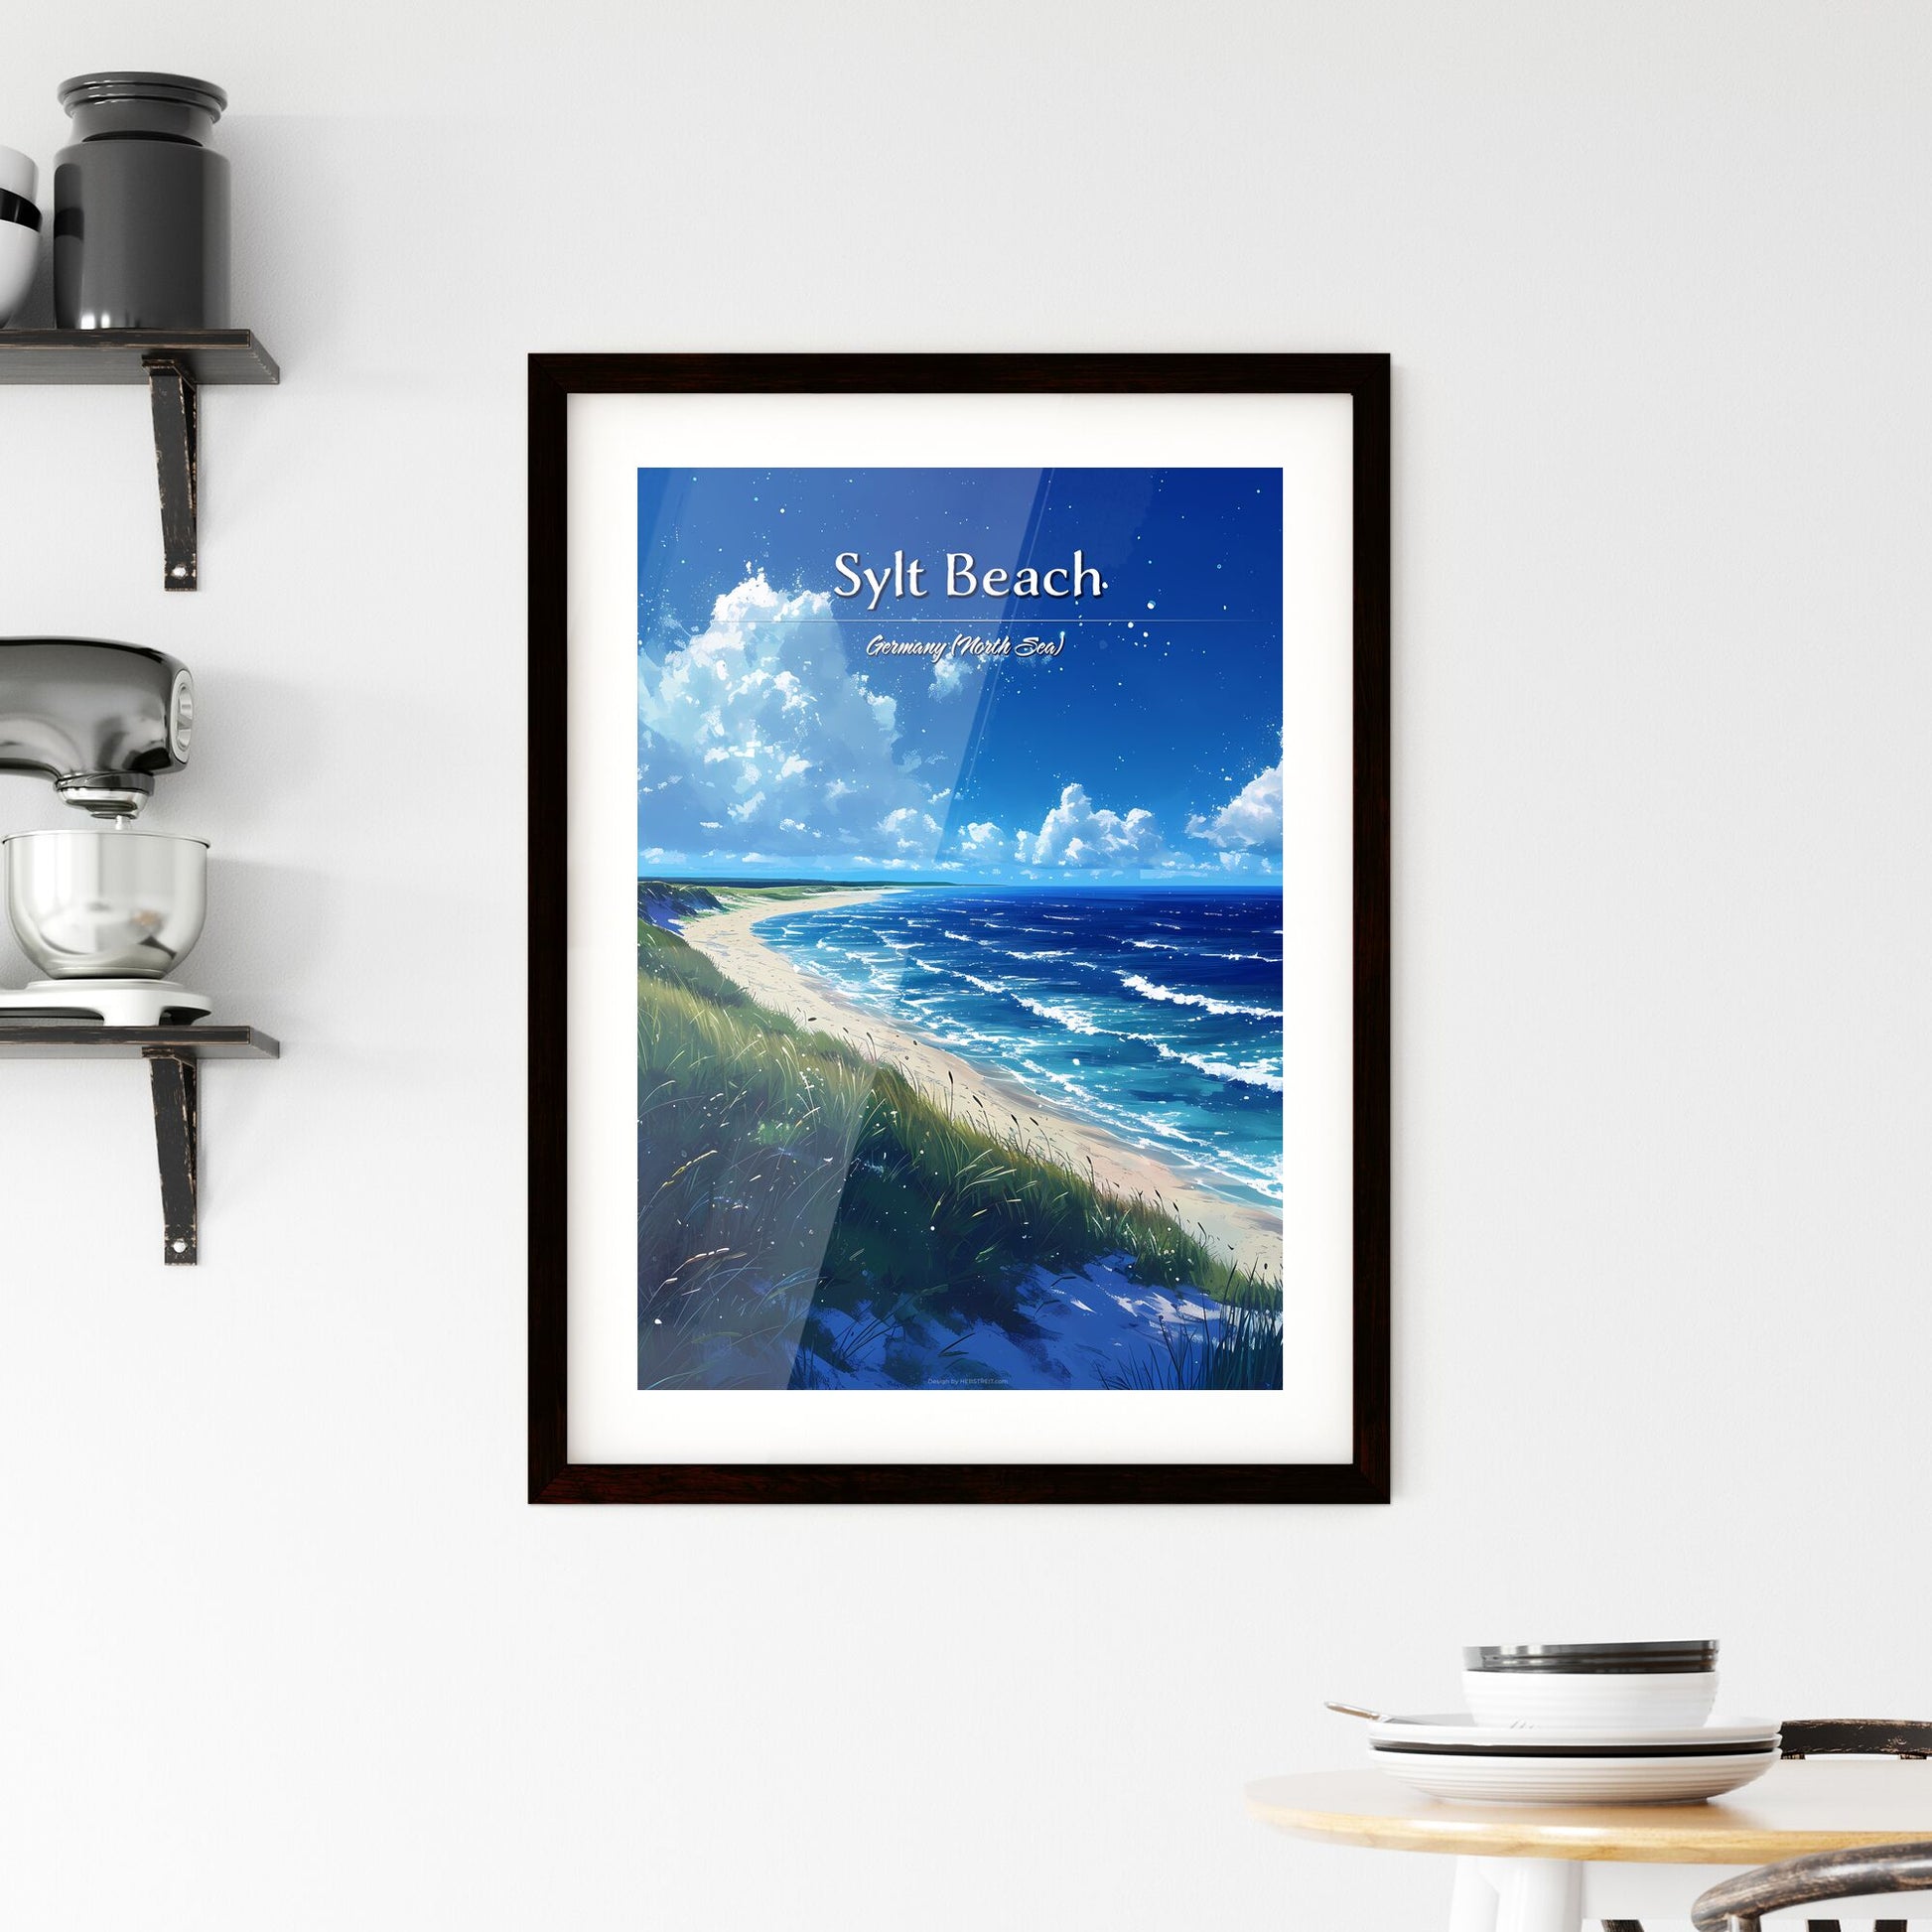 Sylt Beach, Germany (North Sea) - Art print of a beach with grass and water Default Title